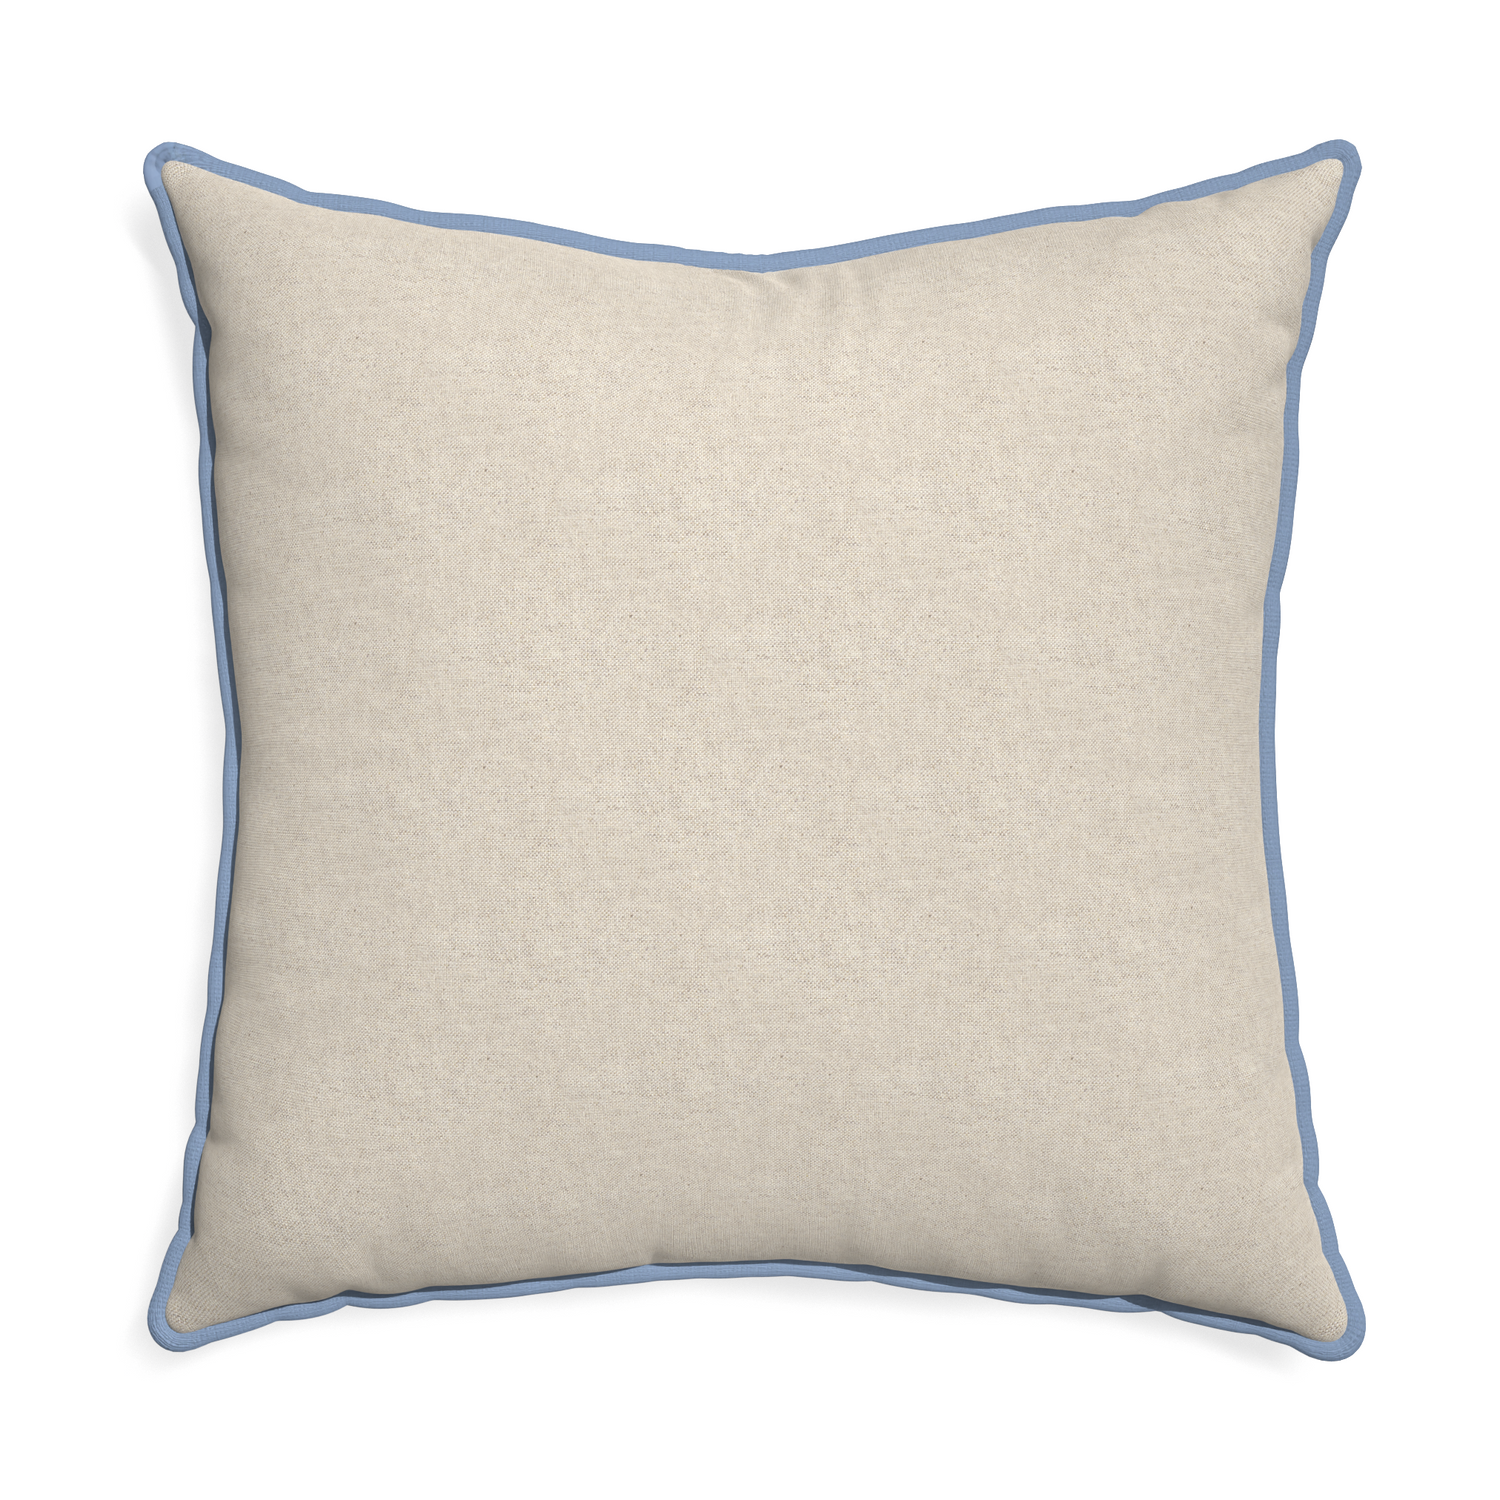 Euro-sham oat custom light brownpillow with sky piping on white background